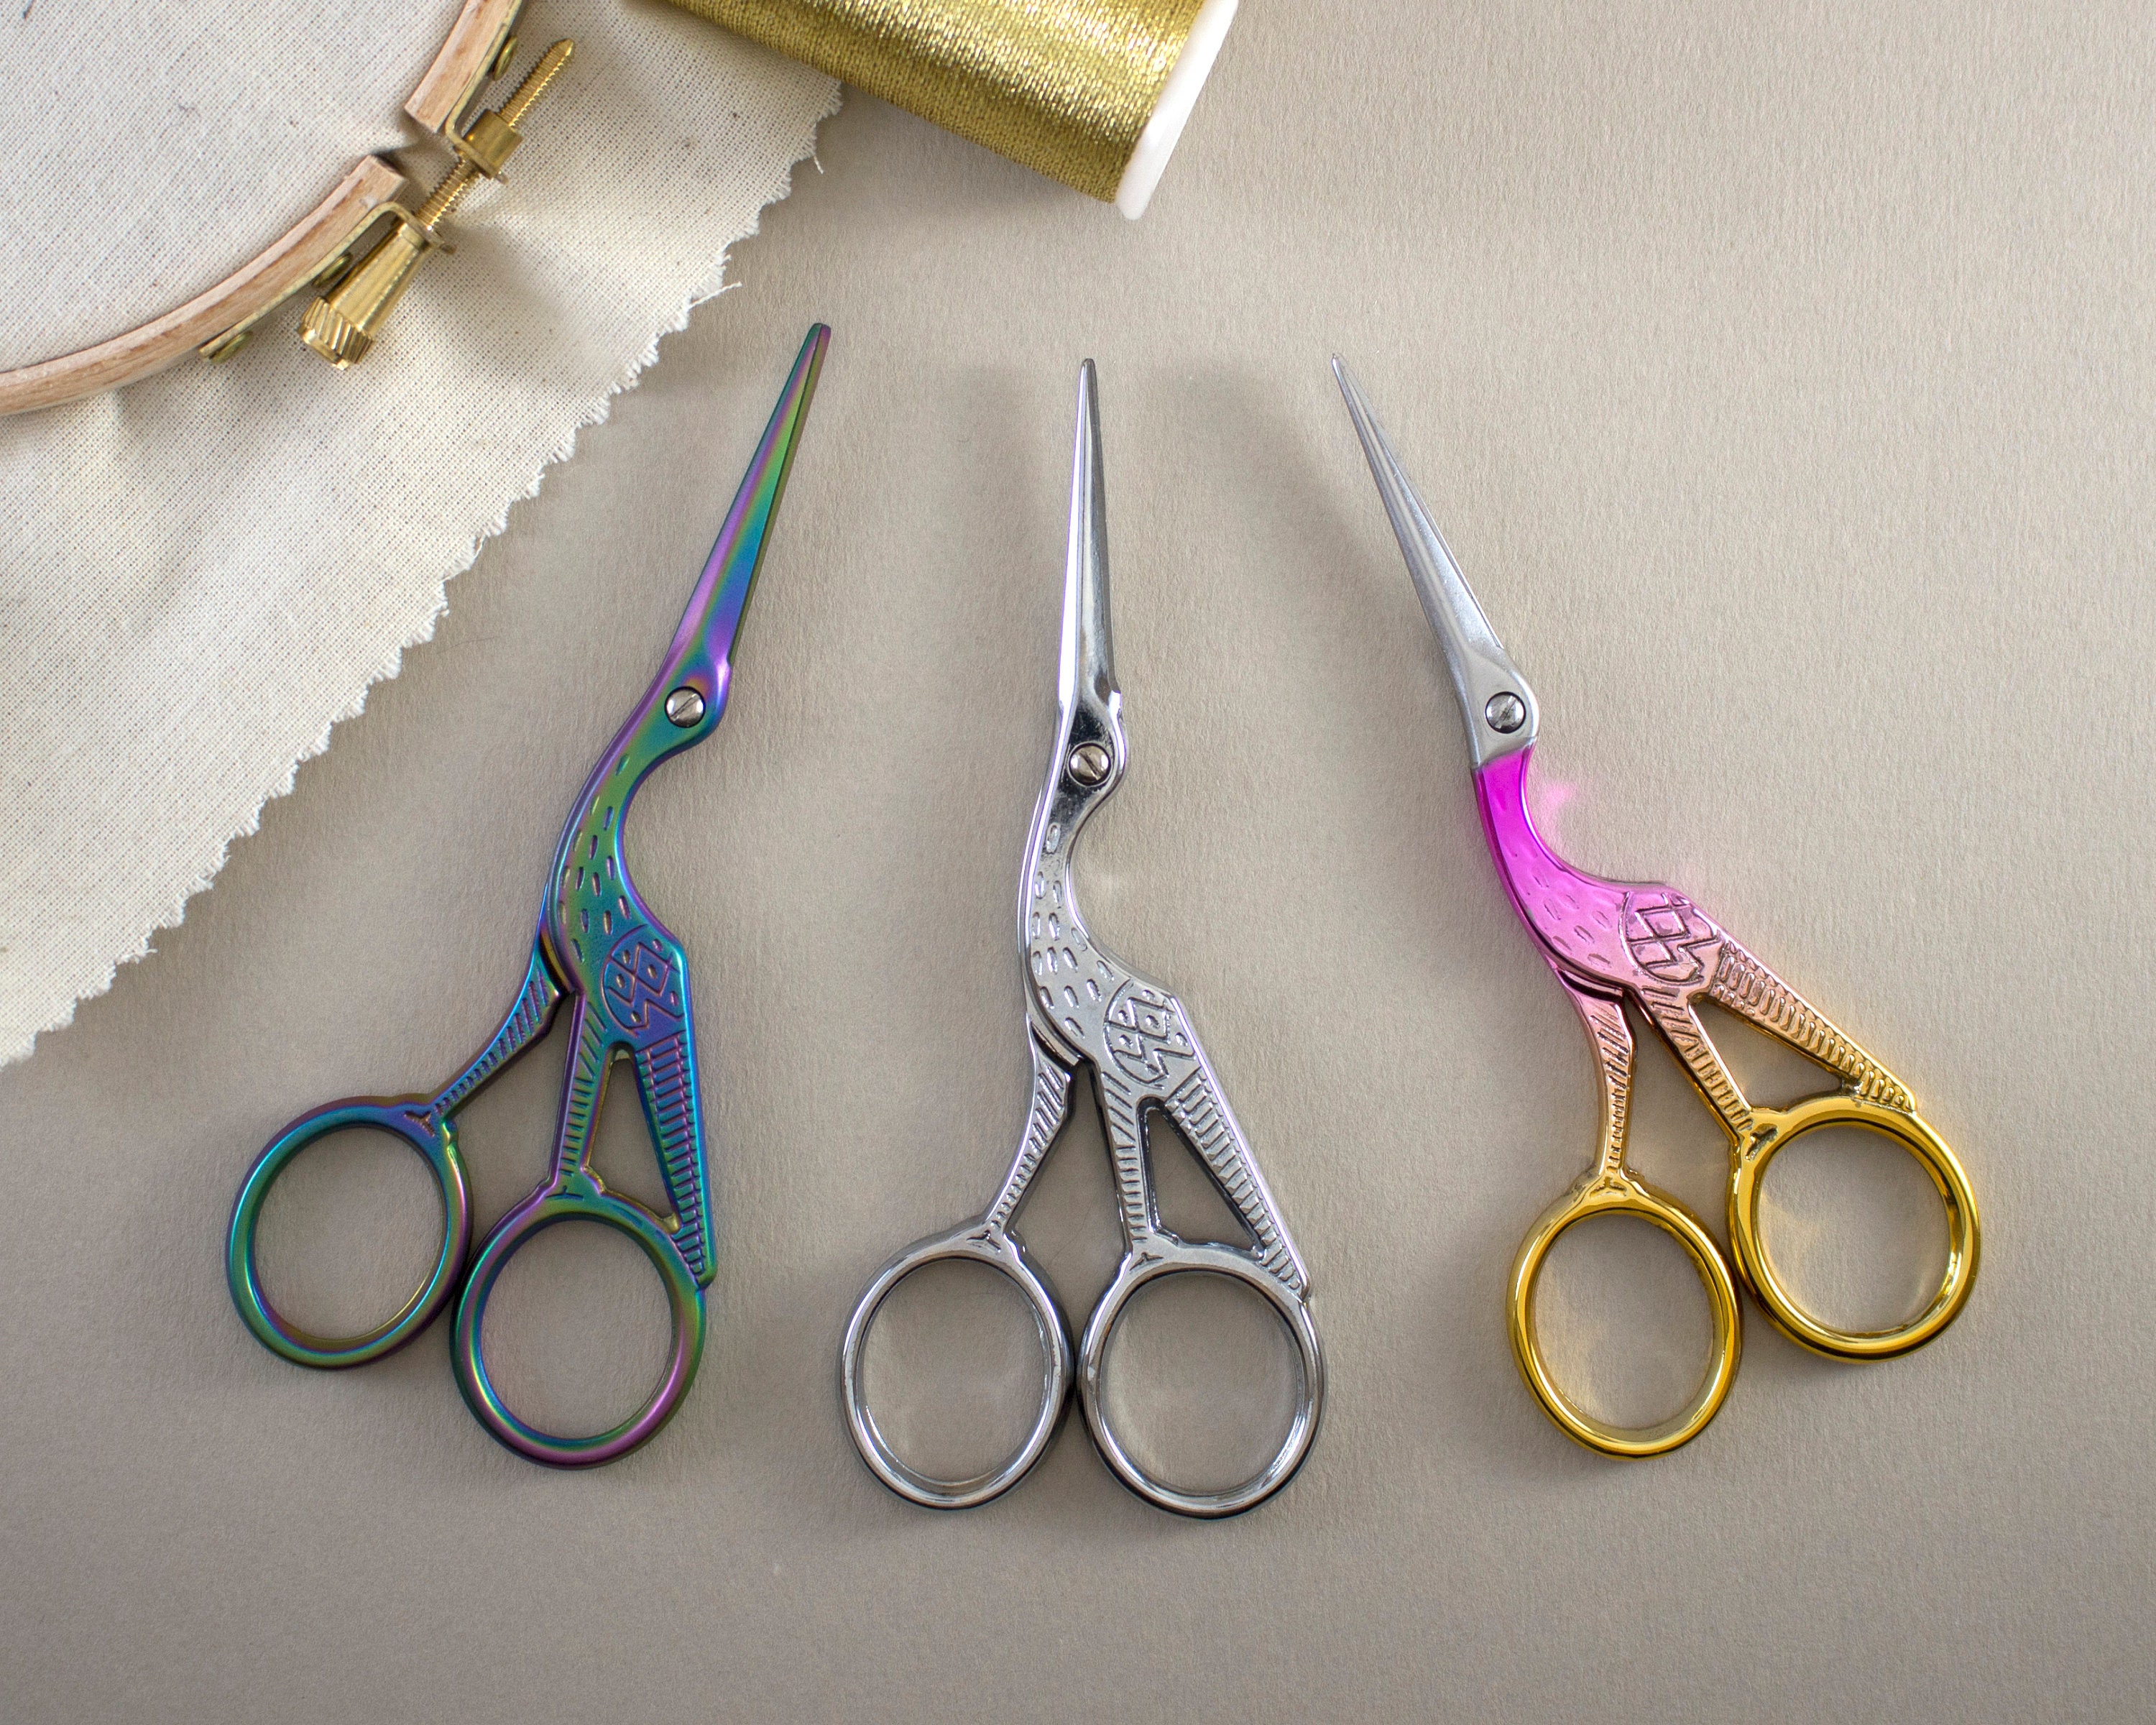 Stork Scissors Silver, Gold and Pink, Rainbow for Crochet Embroidery Sewing  Crafting, 11,5 